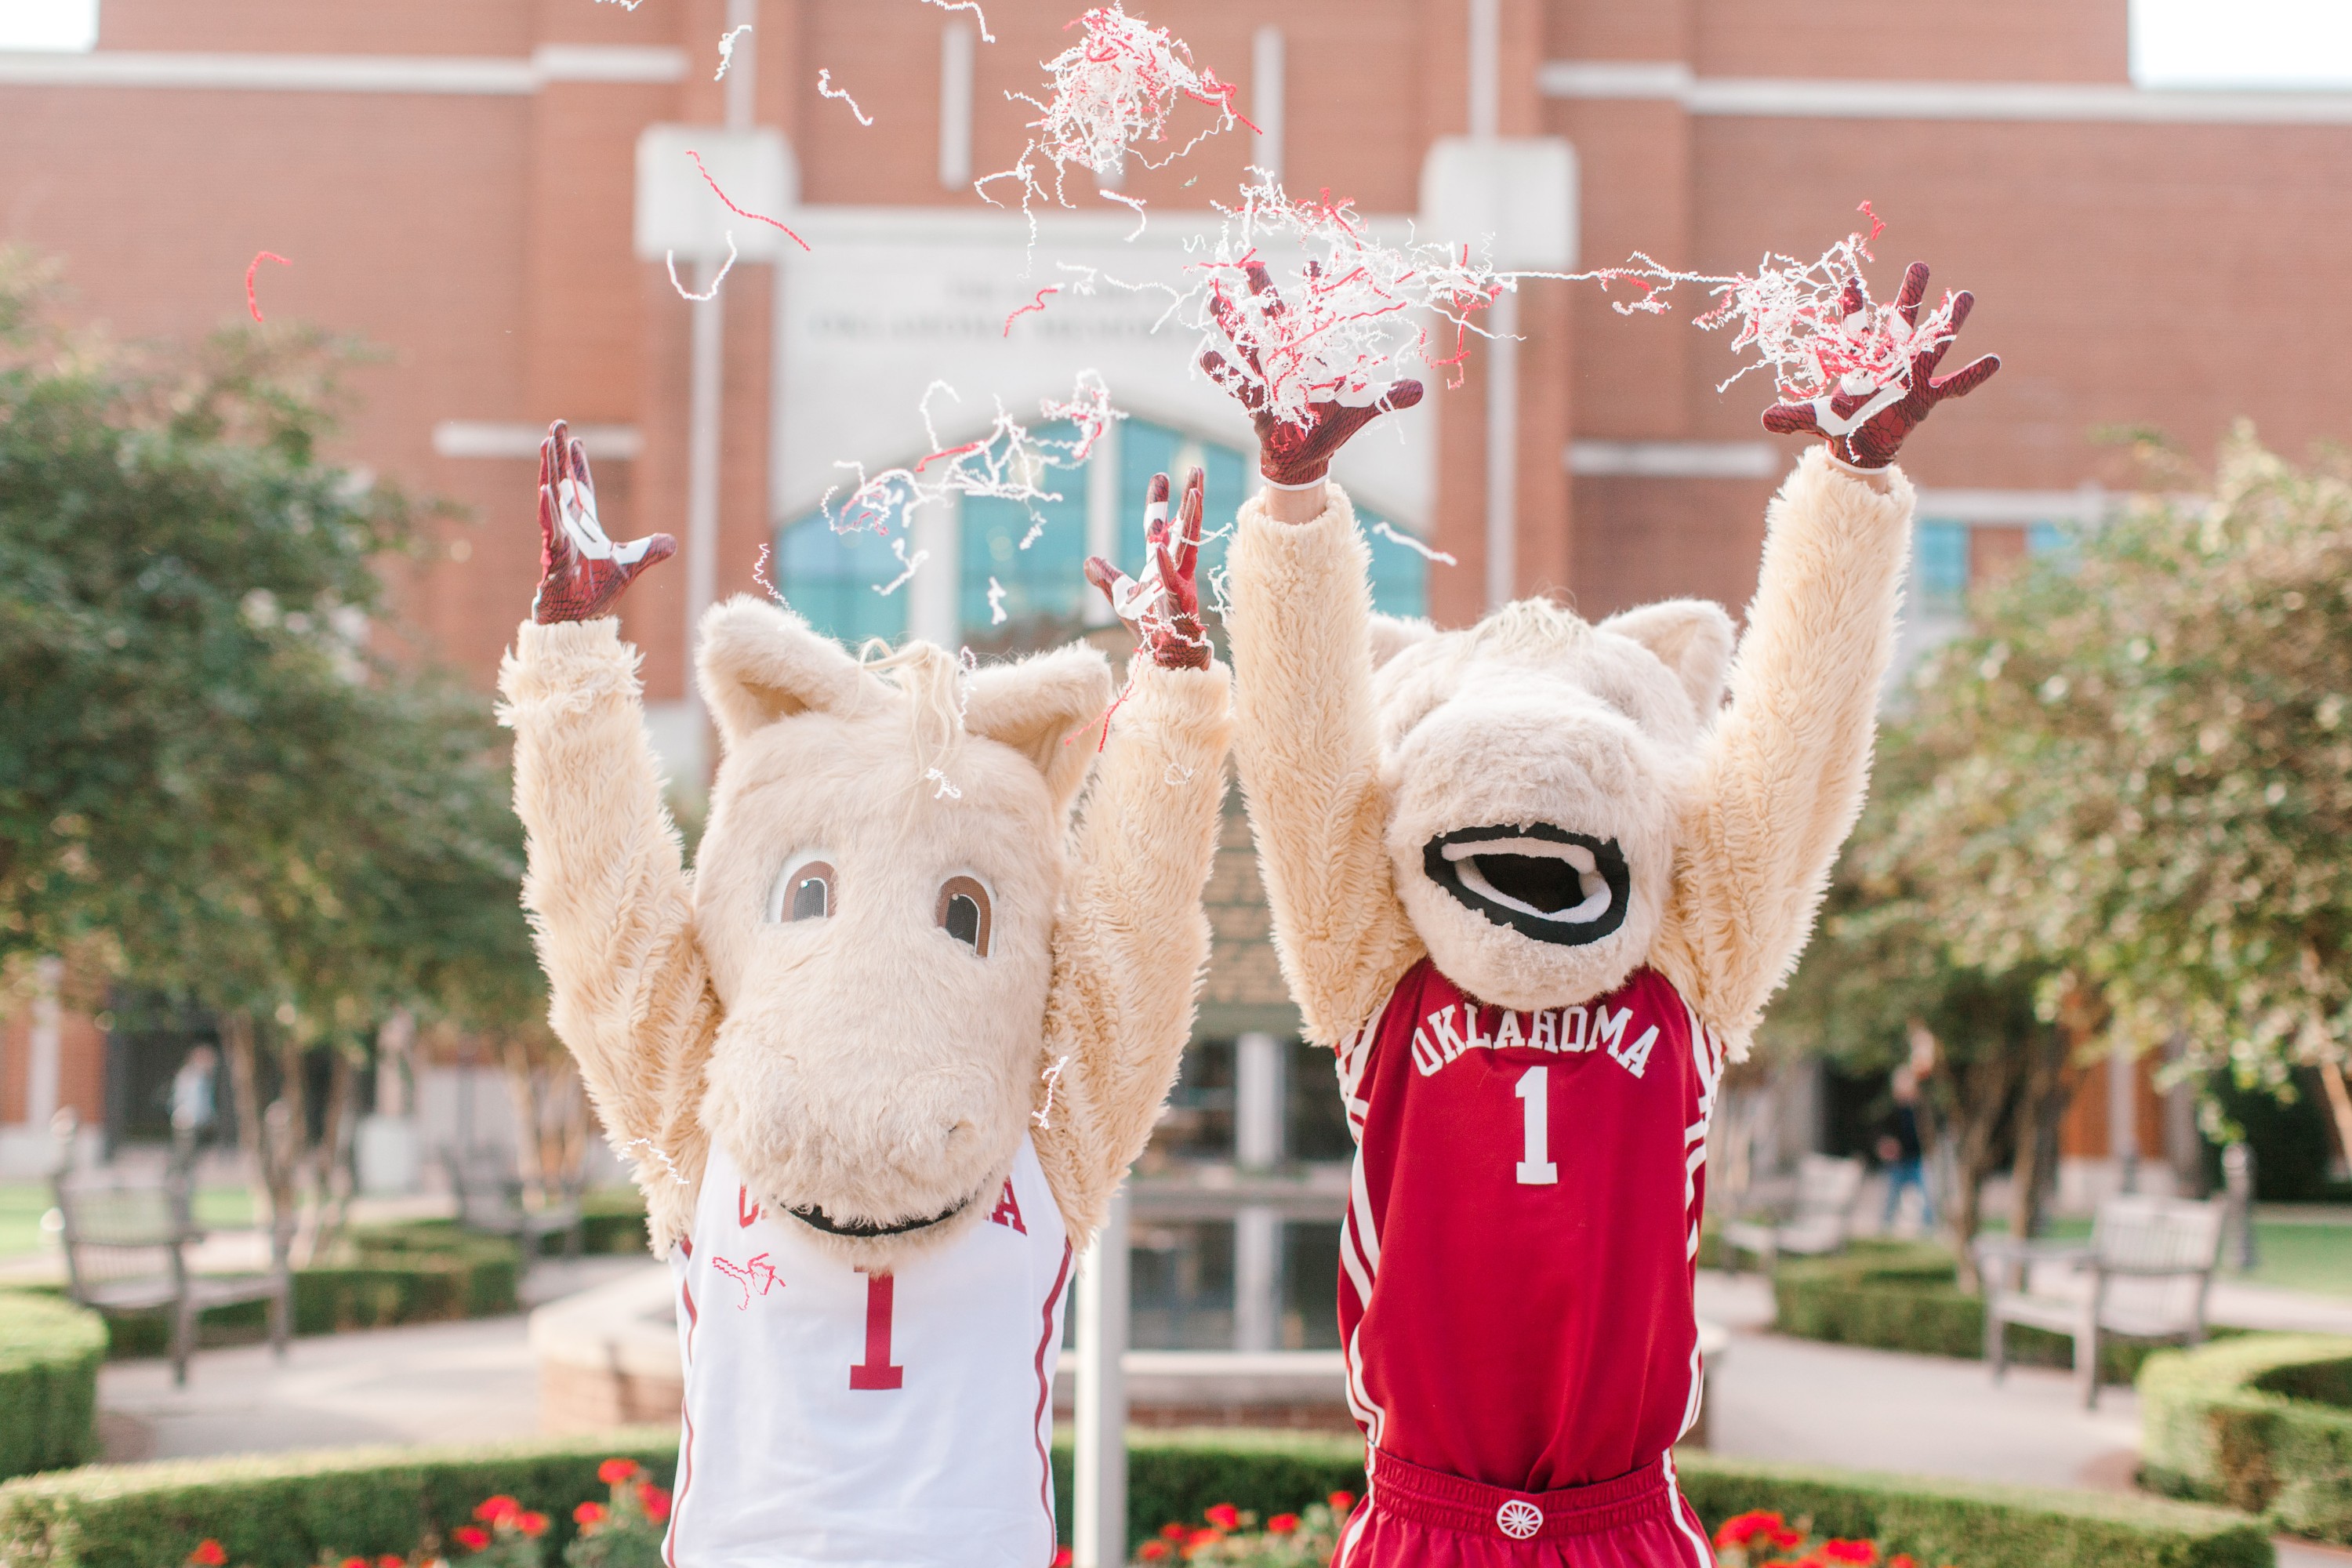 Boomer and Sooner mascots throwing confetti